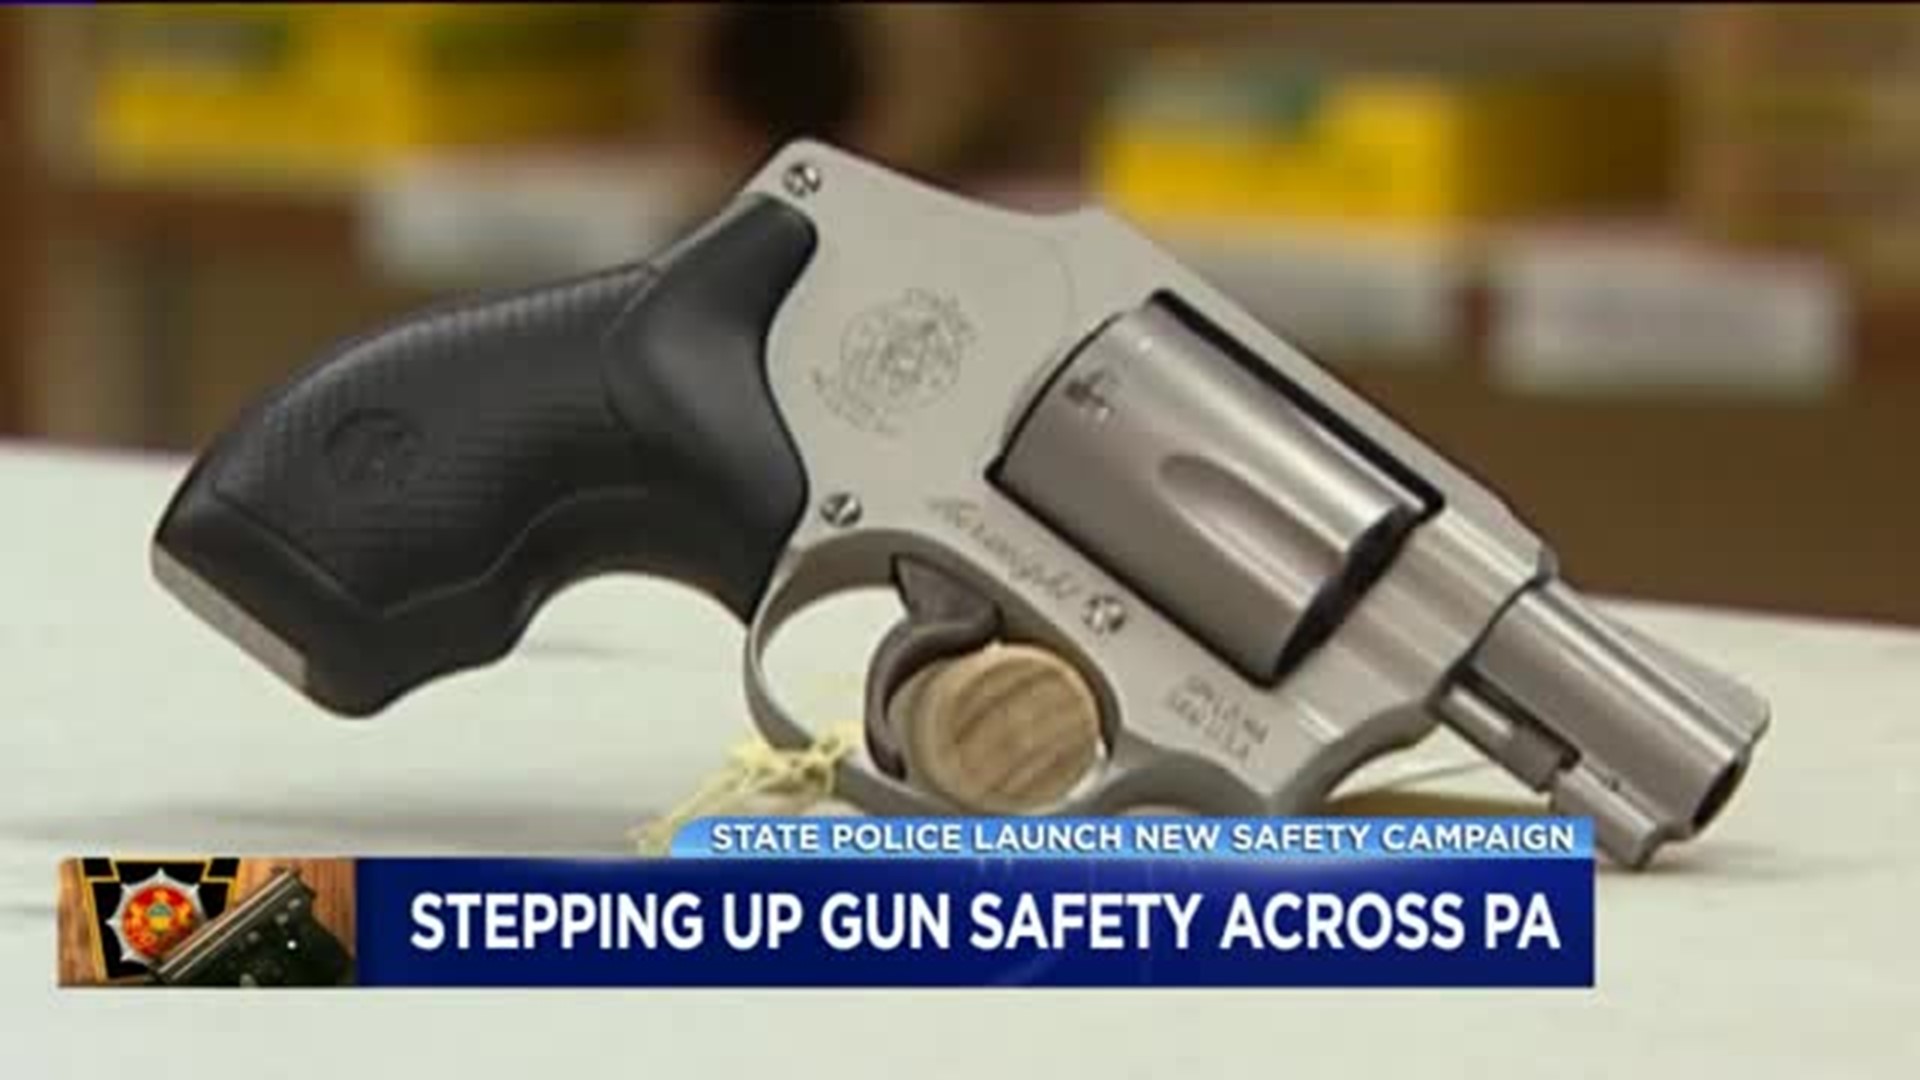 Stepping up Gun Safety Across PA